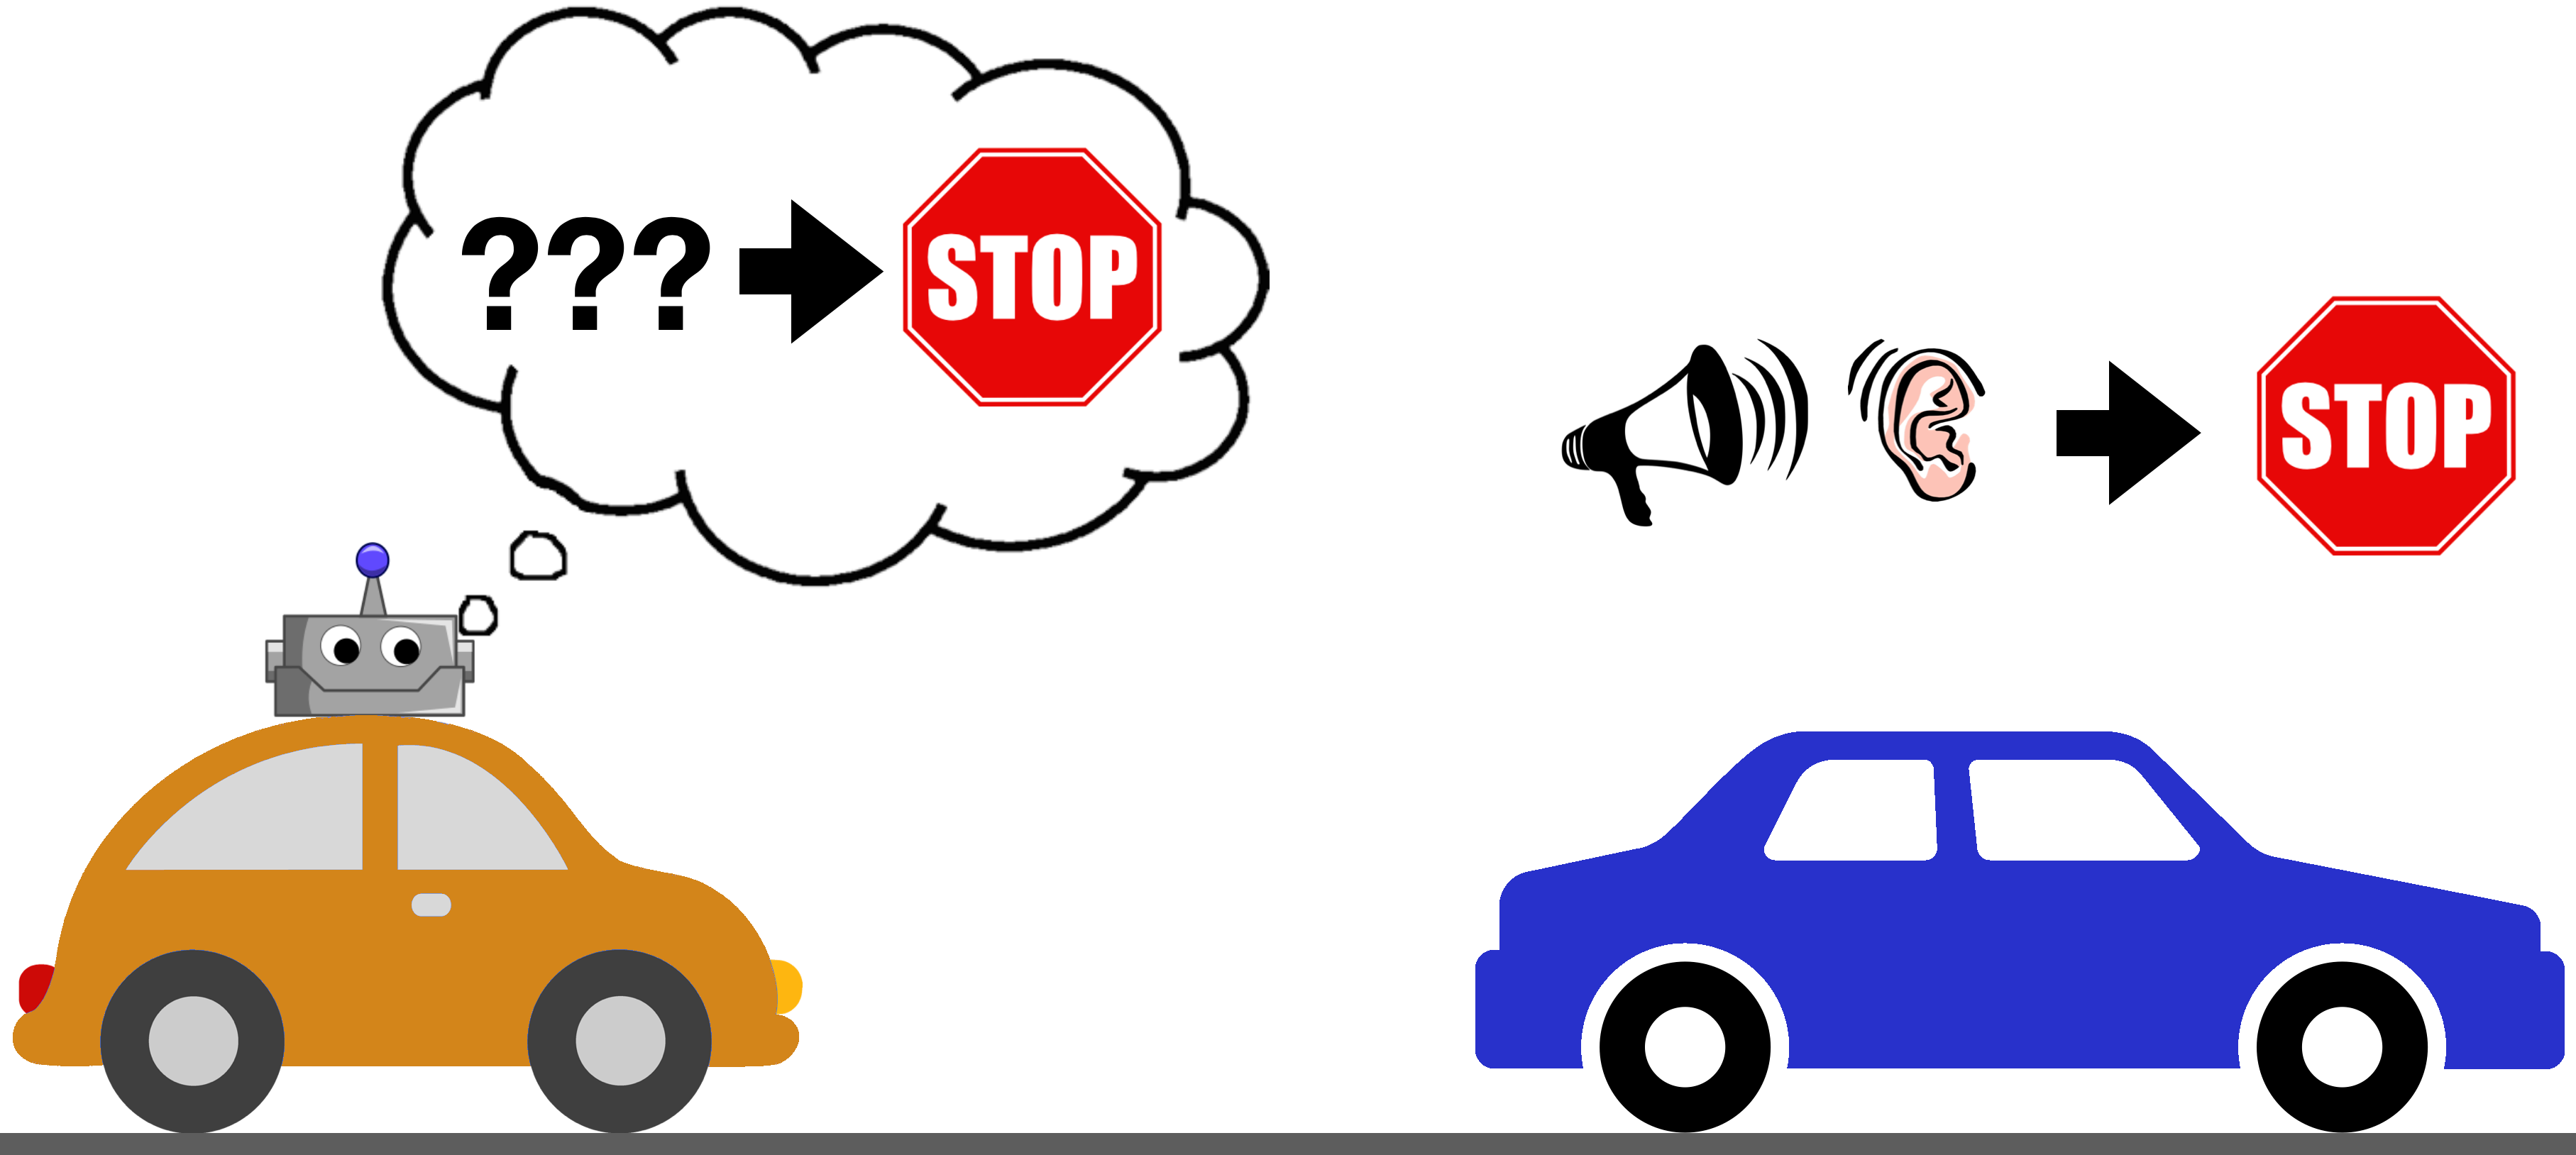 Car stopping upon hearing a noise. A robot is observing, confused why the car stopped.